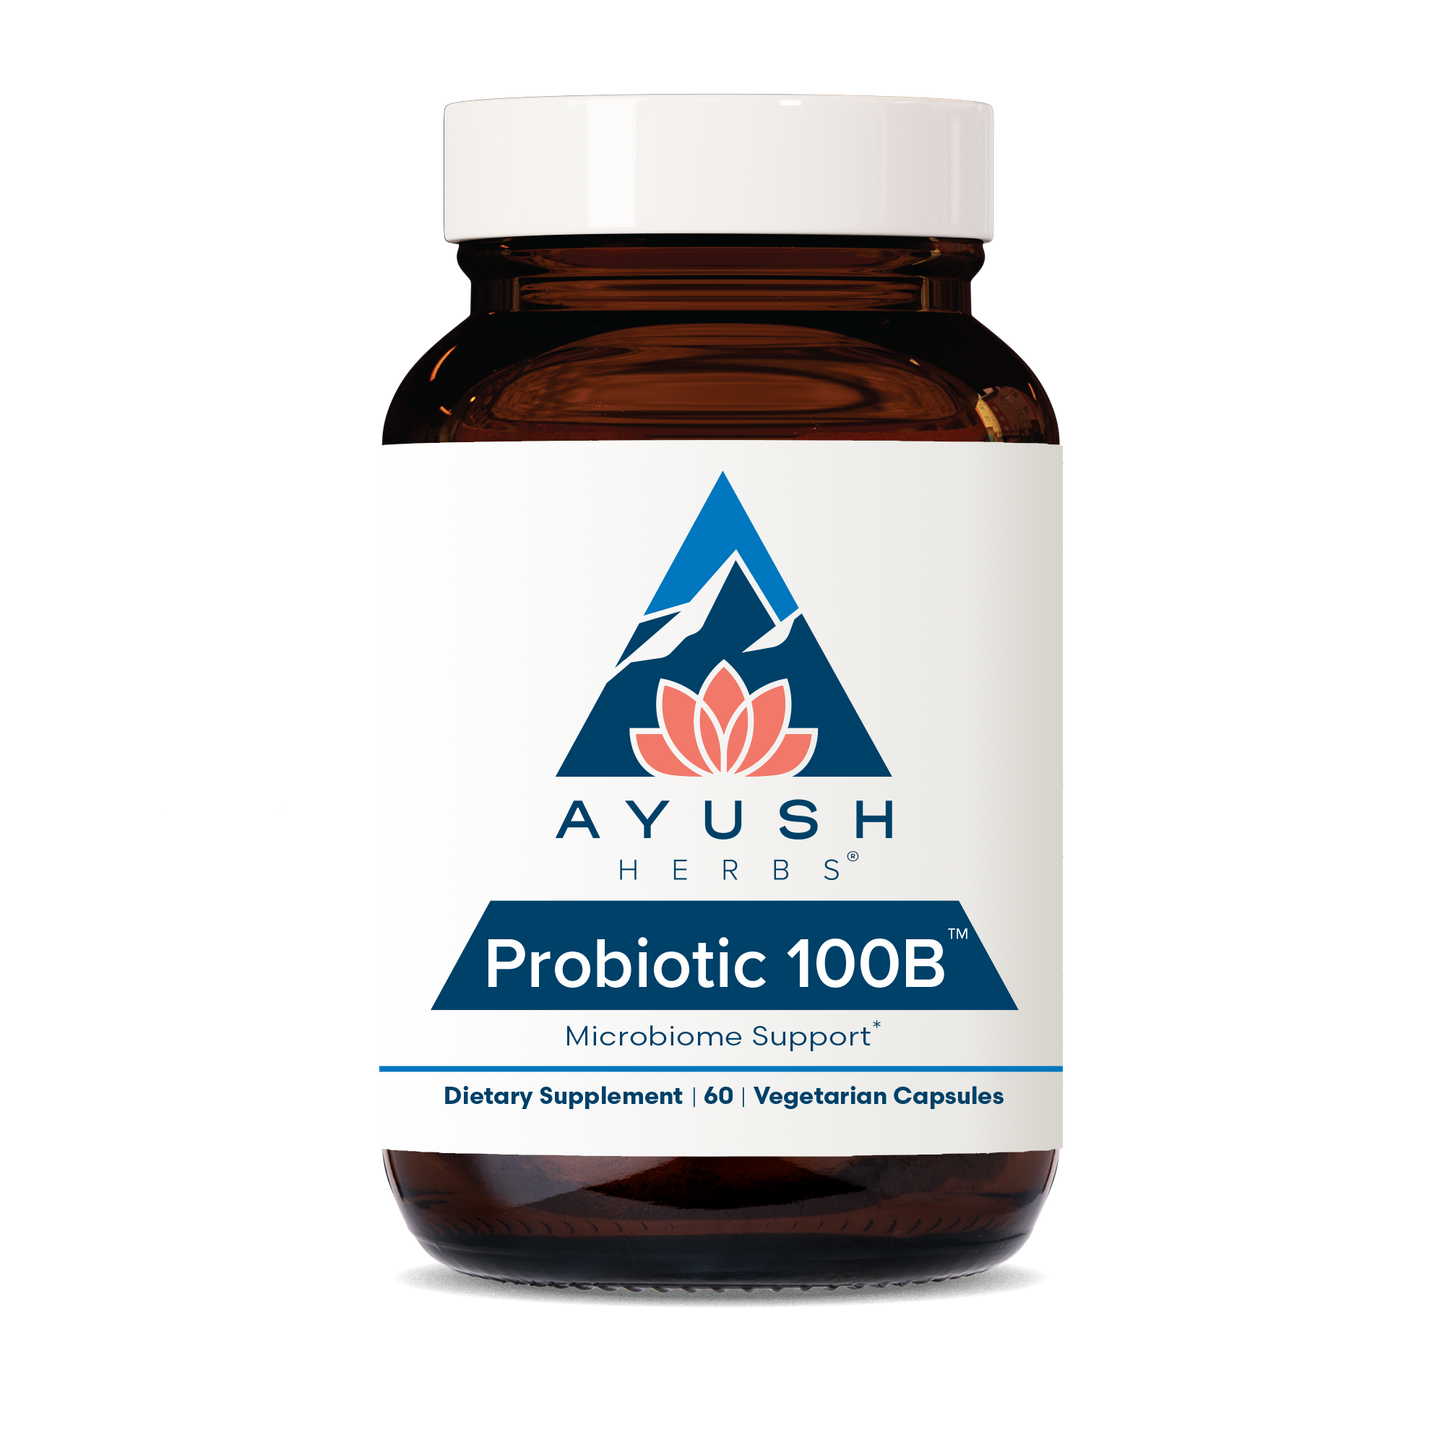 Probiotic 100B Bottle front by Ayush herbs herbal supplements